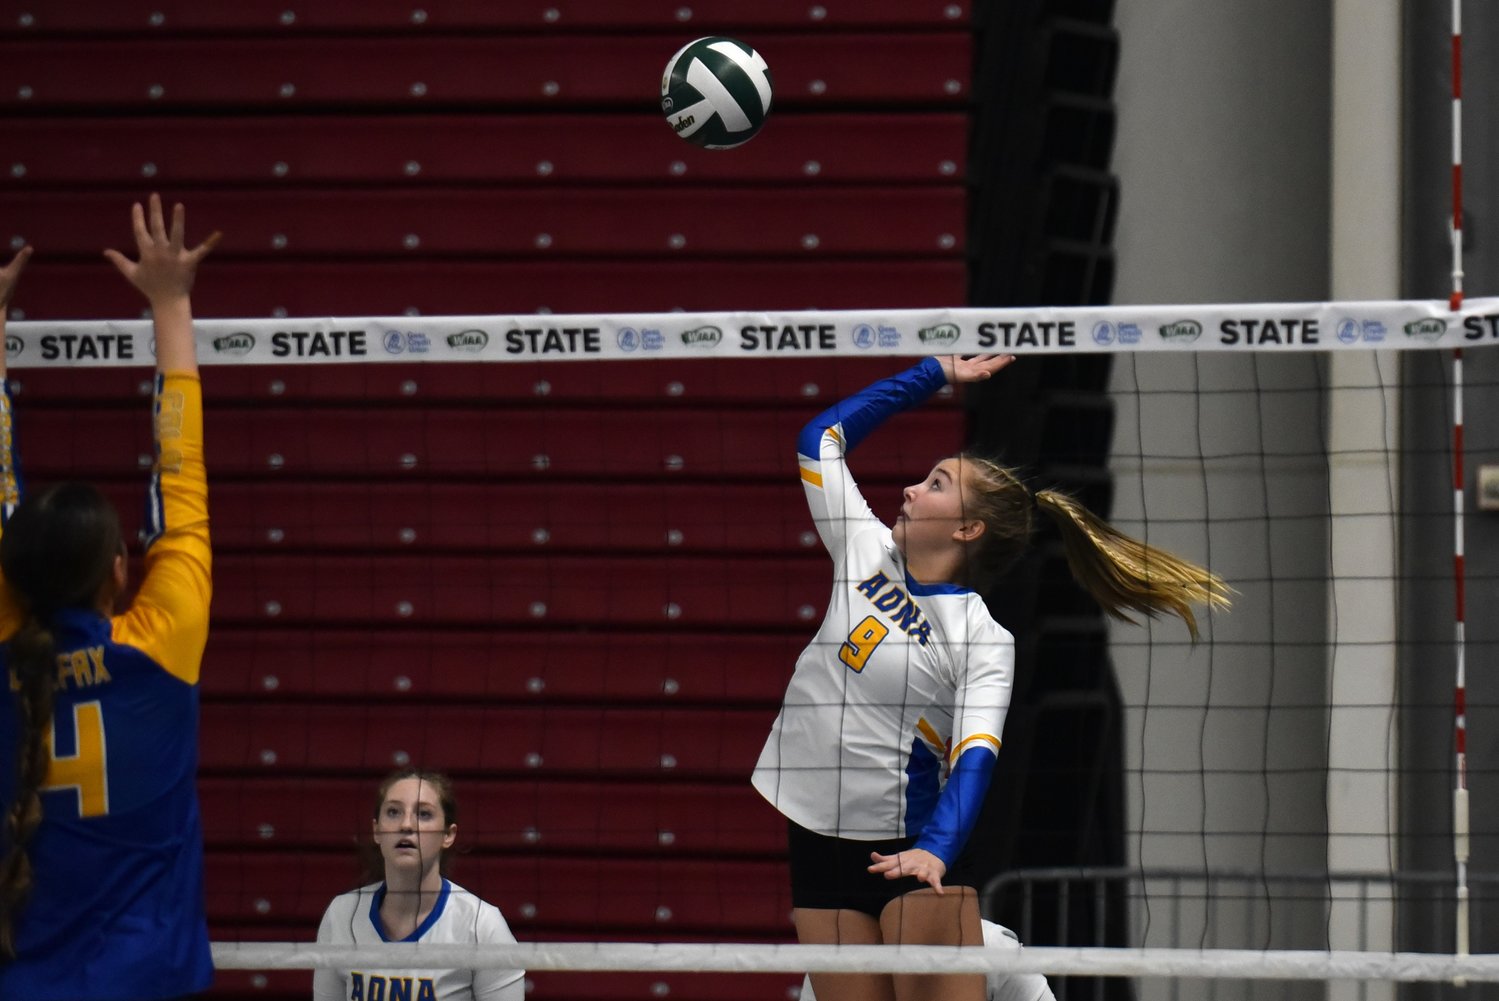 Danika Hallom goes up at the net during the first set of Adna's three-set loss to Colfax in the second round of the 2B state tournament on Nov. 10 in Yakima.